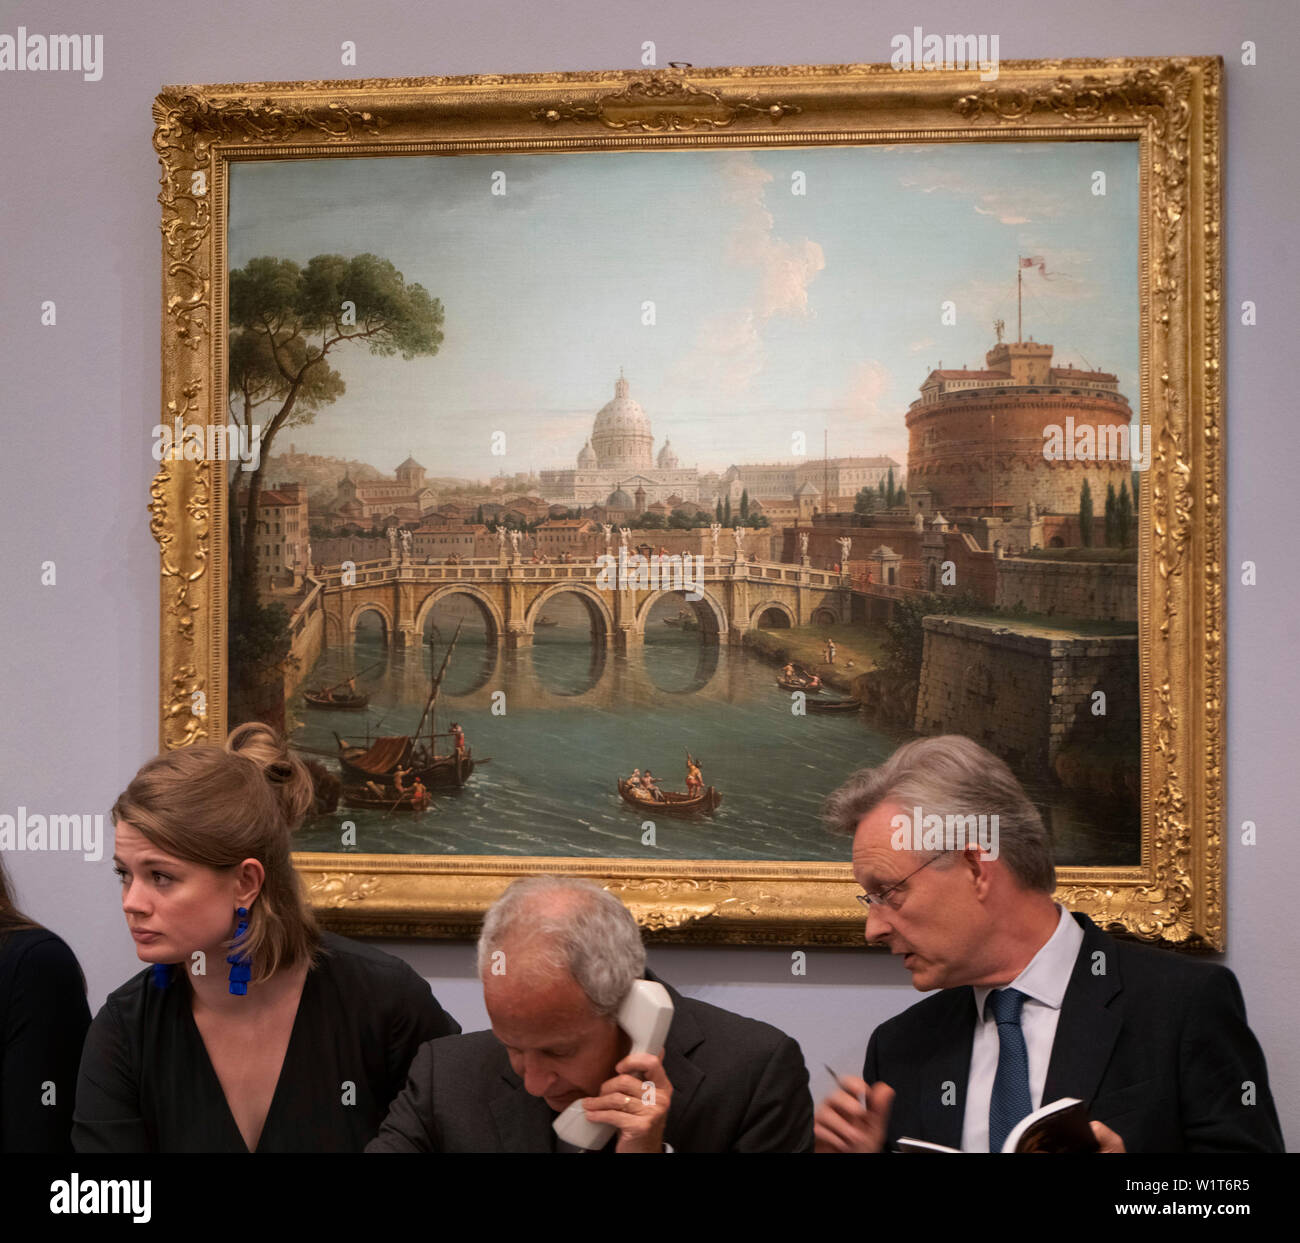 Sotheby’s, London, UK. 3rd July 2019. The summer Old Masters Evening sale offers paintings from the 14th - 19th century by many of the most important painters of Western art. Highlights include a masterpiece by each of Britain’s greatest landscape painters - Turner, Constable and Gainsborough - and extraordinary works from the Baroque by Ribera and the exceptionally rare Johann Liss. Image: Antonio Joli, Rome, looking towards the Castel Sant’ Angelo, with Saint Peters Basilica beyond, sells for £543,000. Credit: Malcolm Park/Alamy Live News. Stock Photo